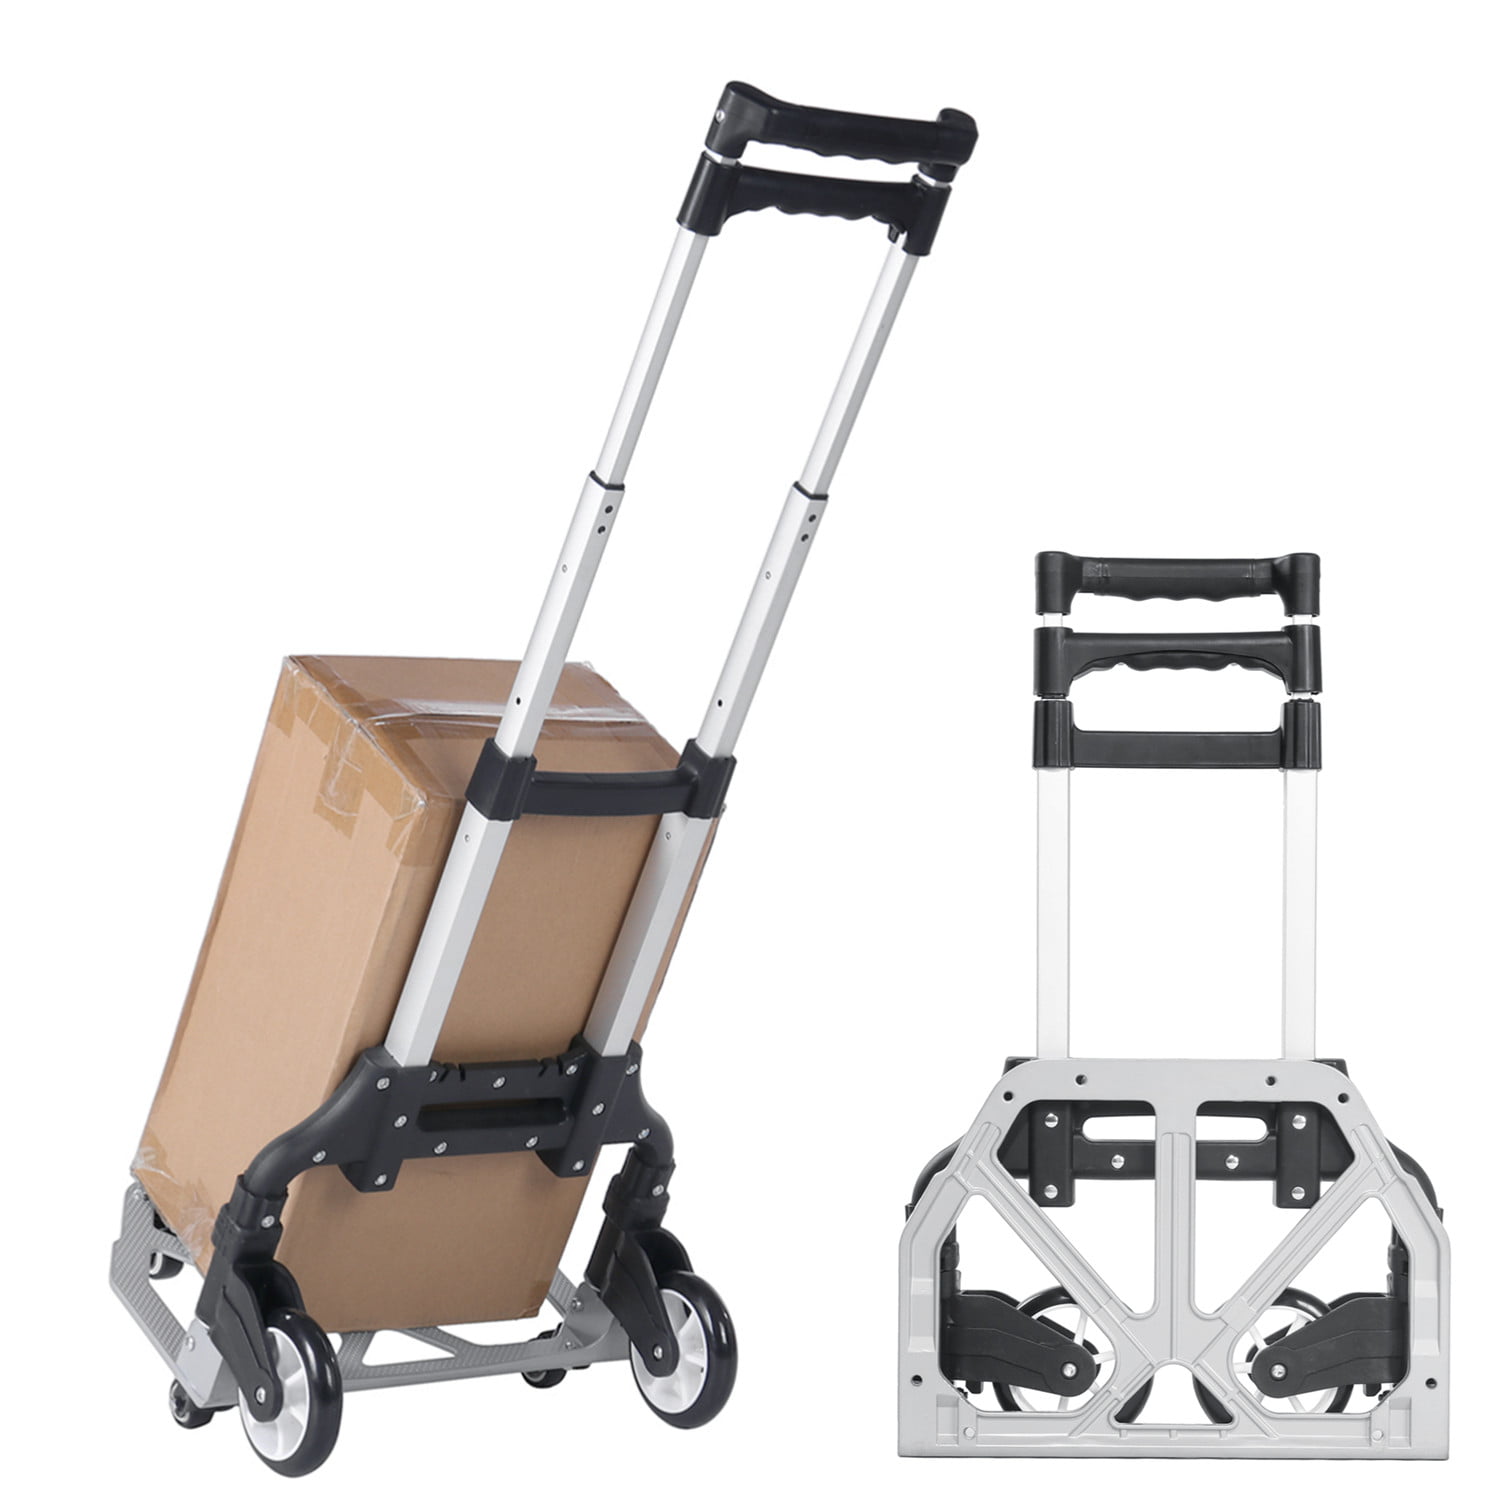 150kg/330lbs Load Capacity Compact Lightweight Durable Aluminum Alloy Hand Truck for Luggage Feyue Folding Luggage Cart Travel Trolley Travel Shopping Moving and Office Use 